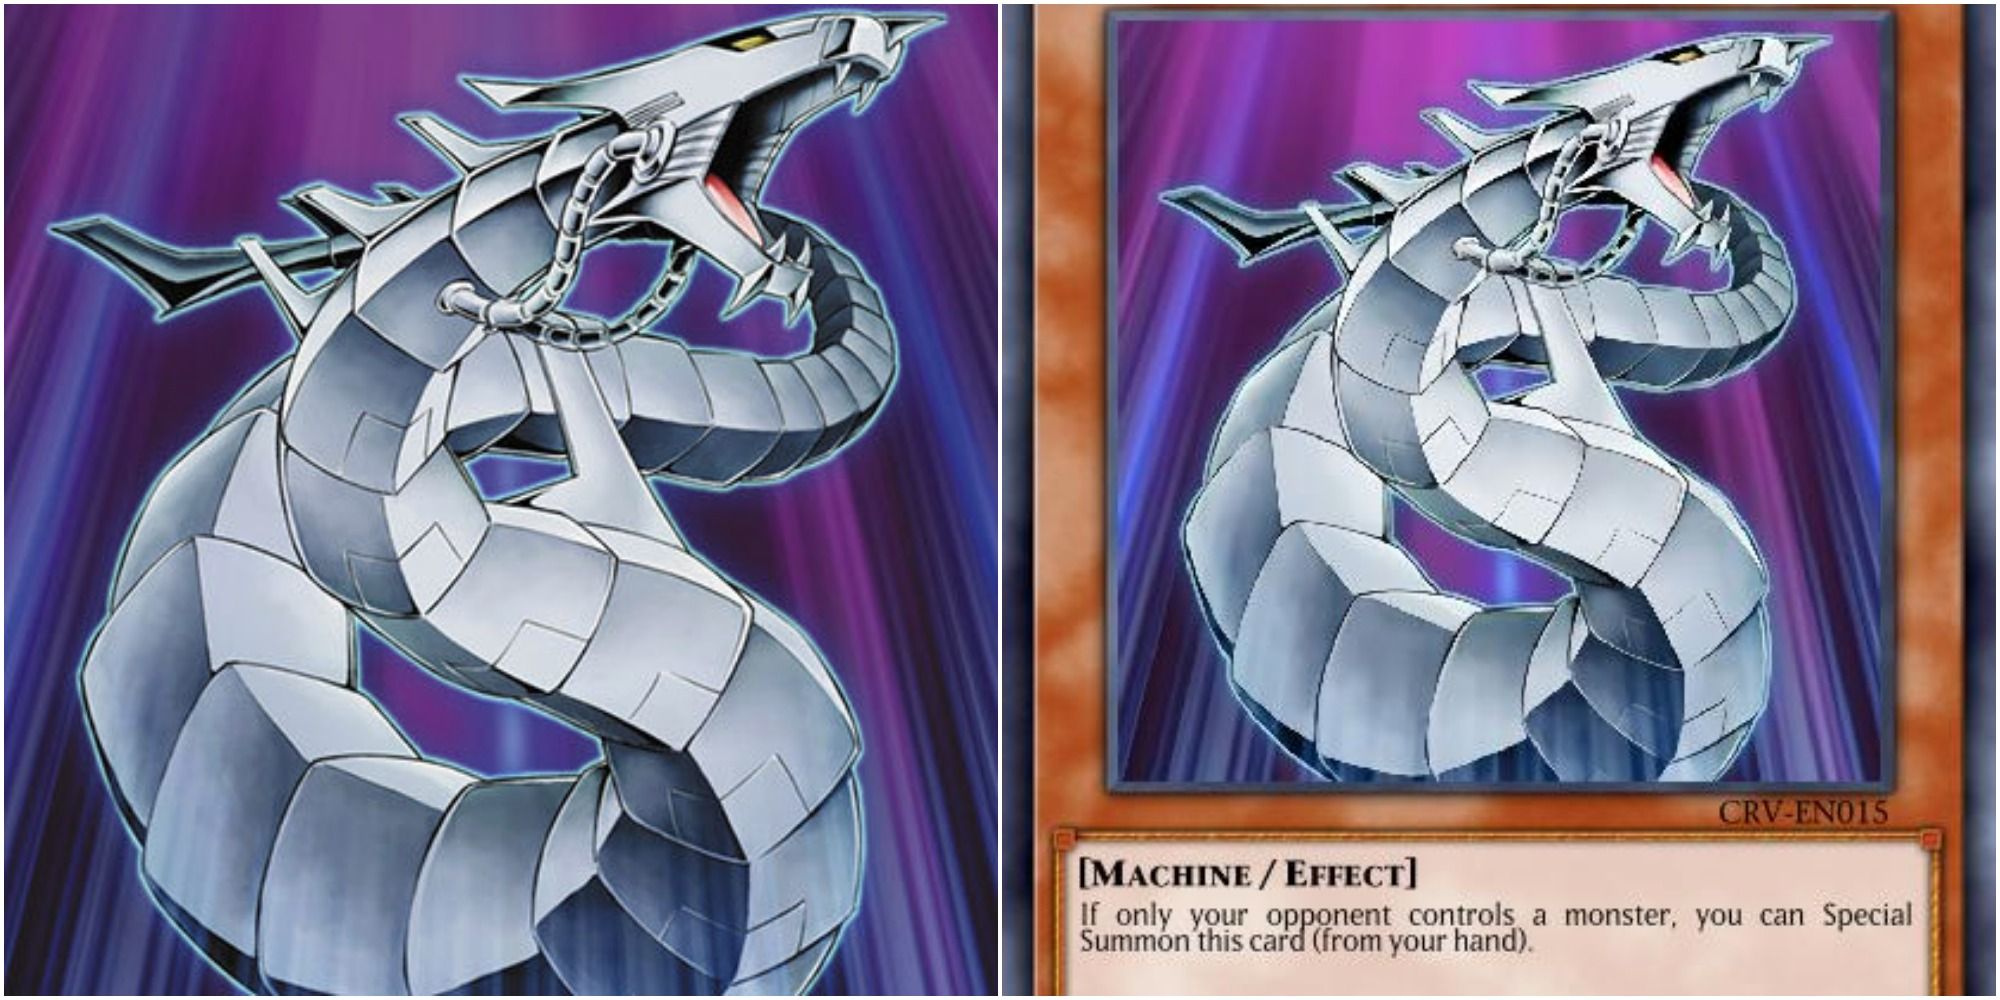 yugioh cyber dragon card art and text